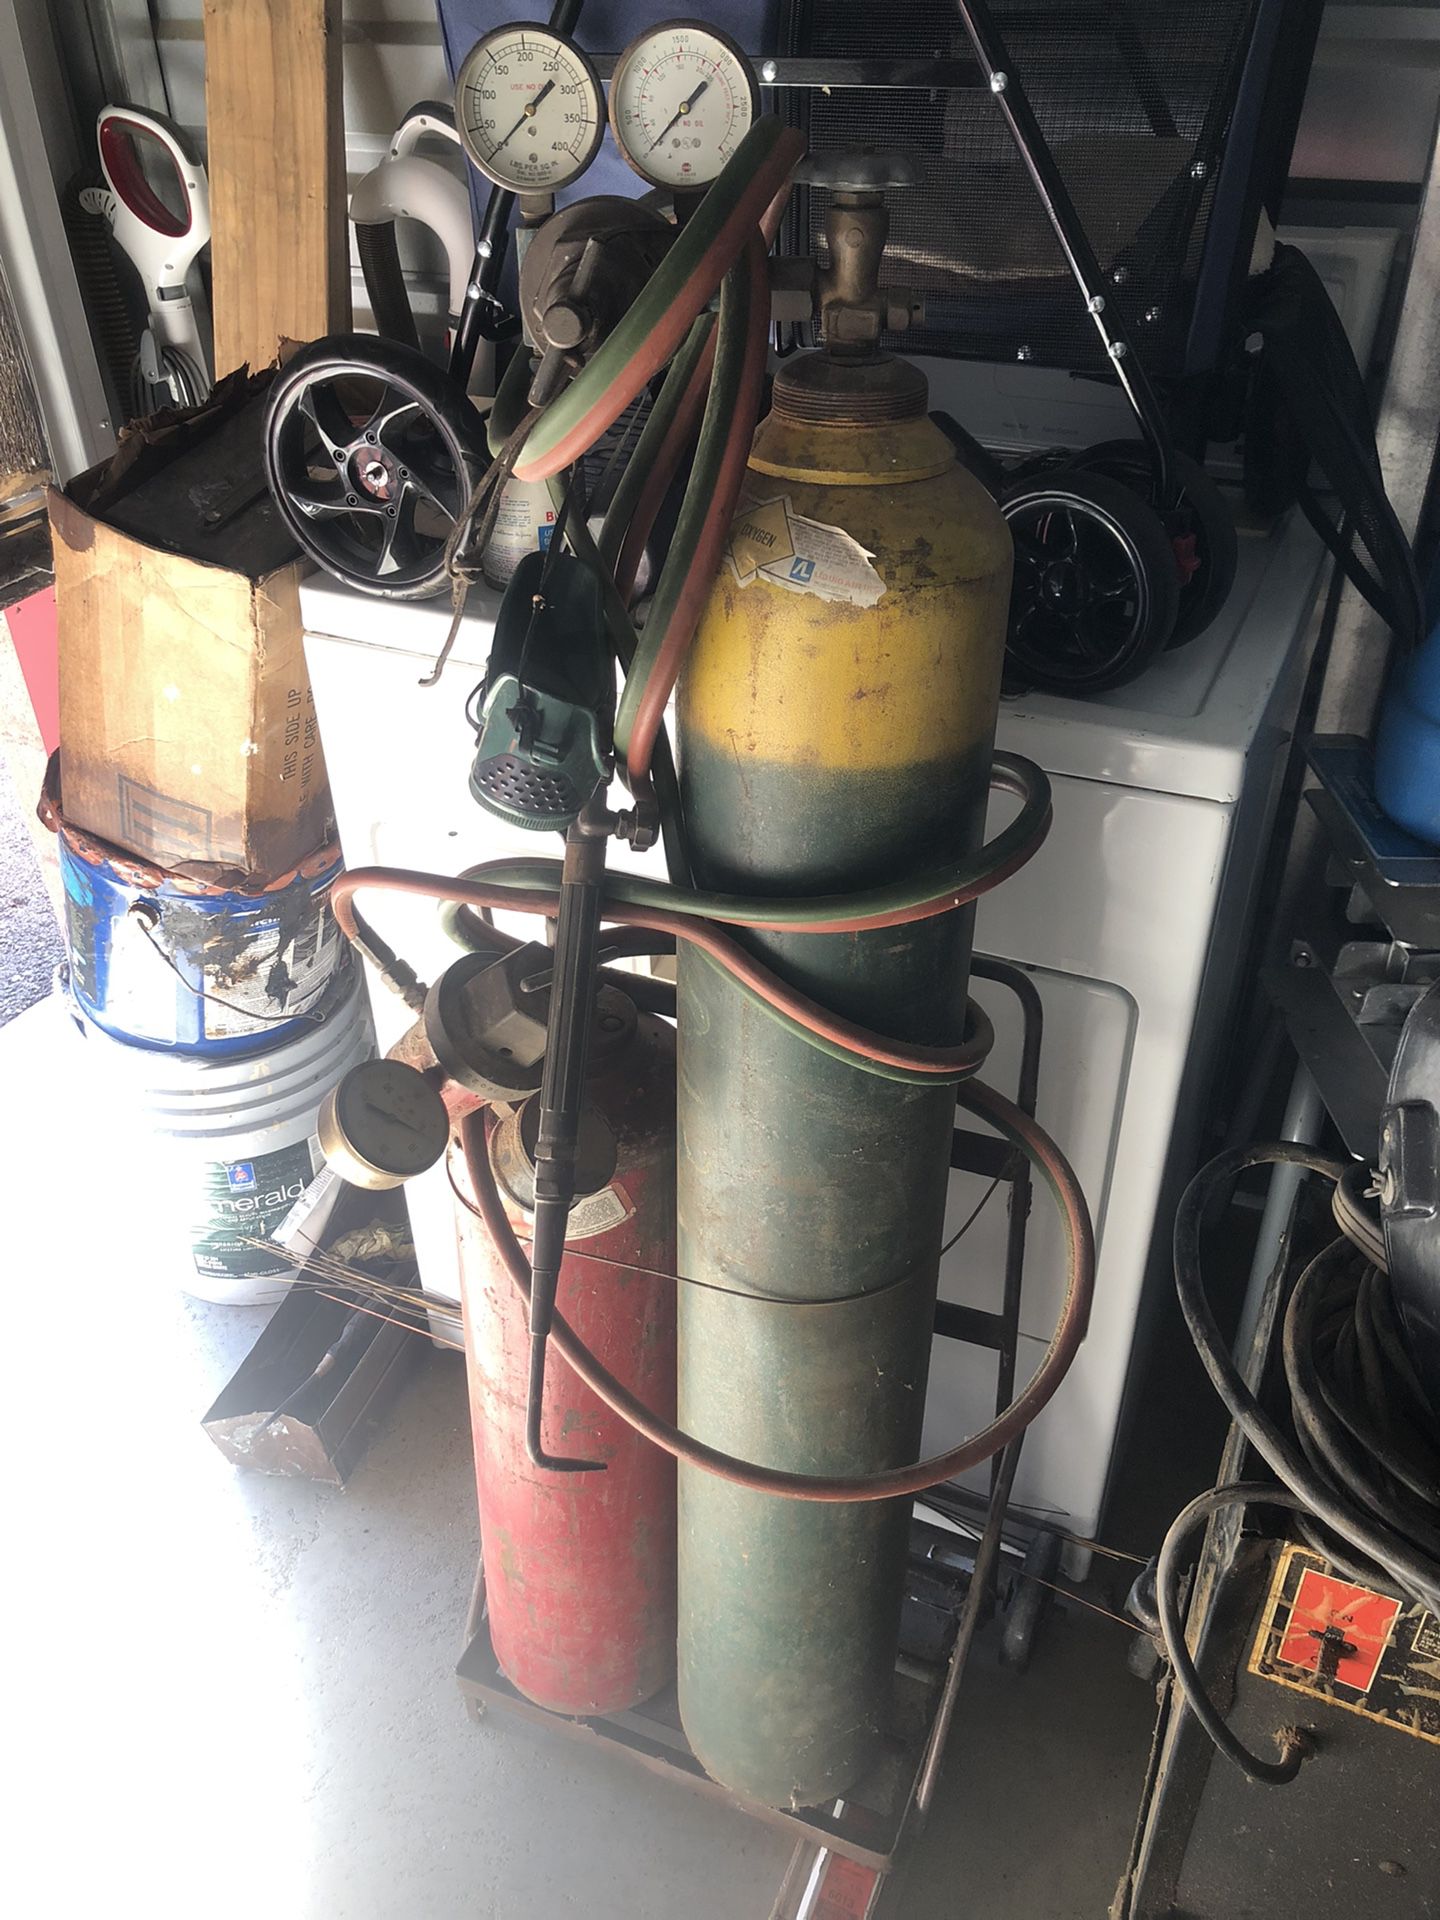 Acetylene and oxygen cutting tanks and torch gauges etc.